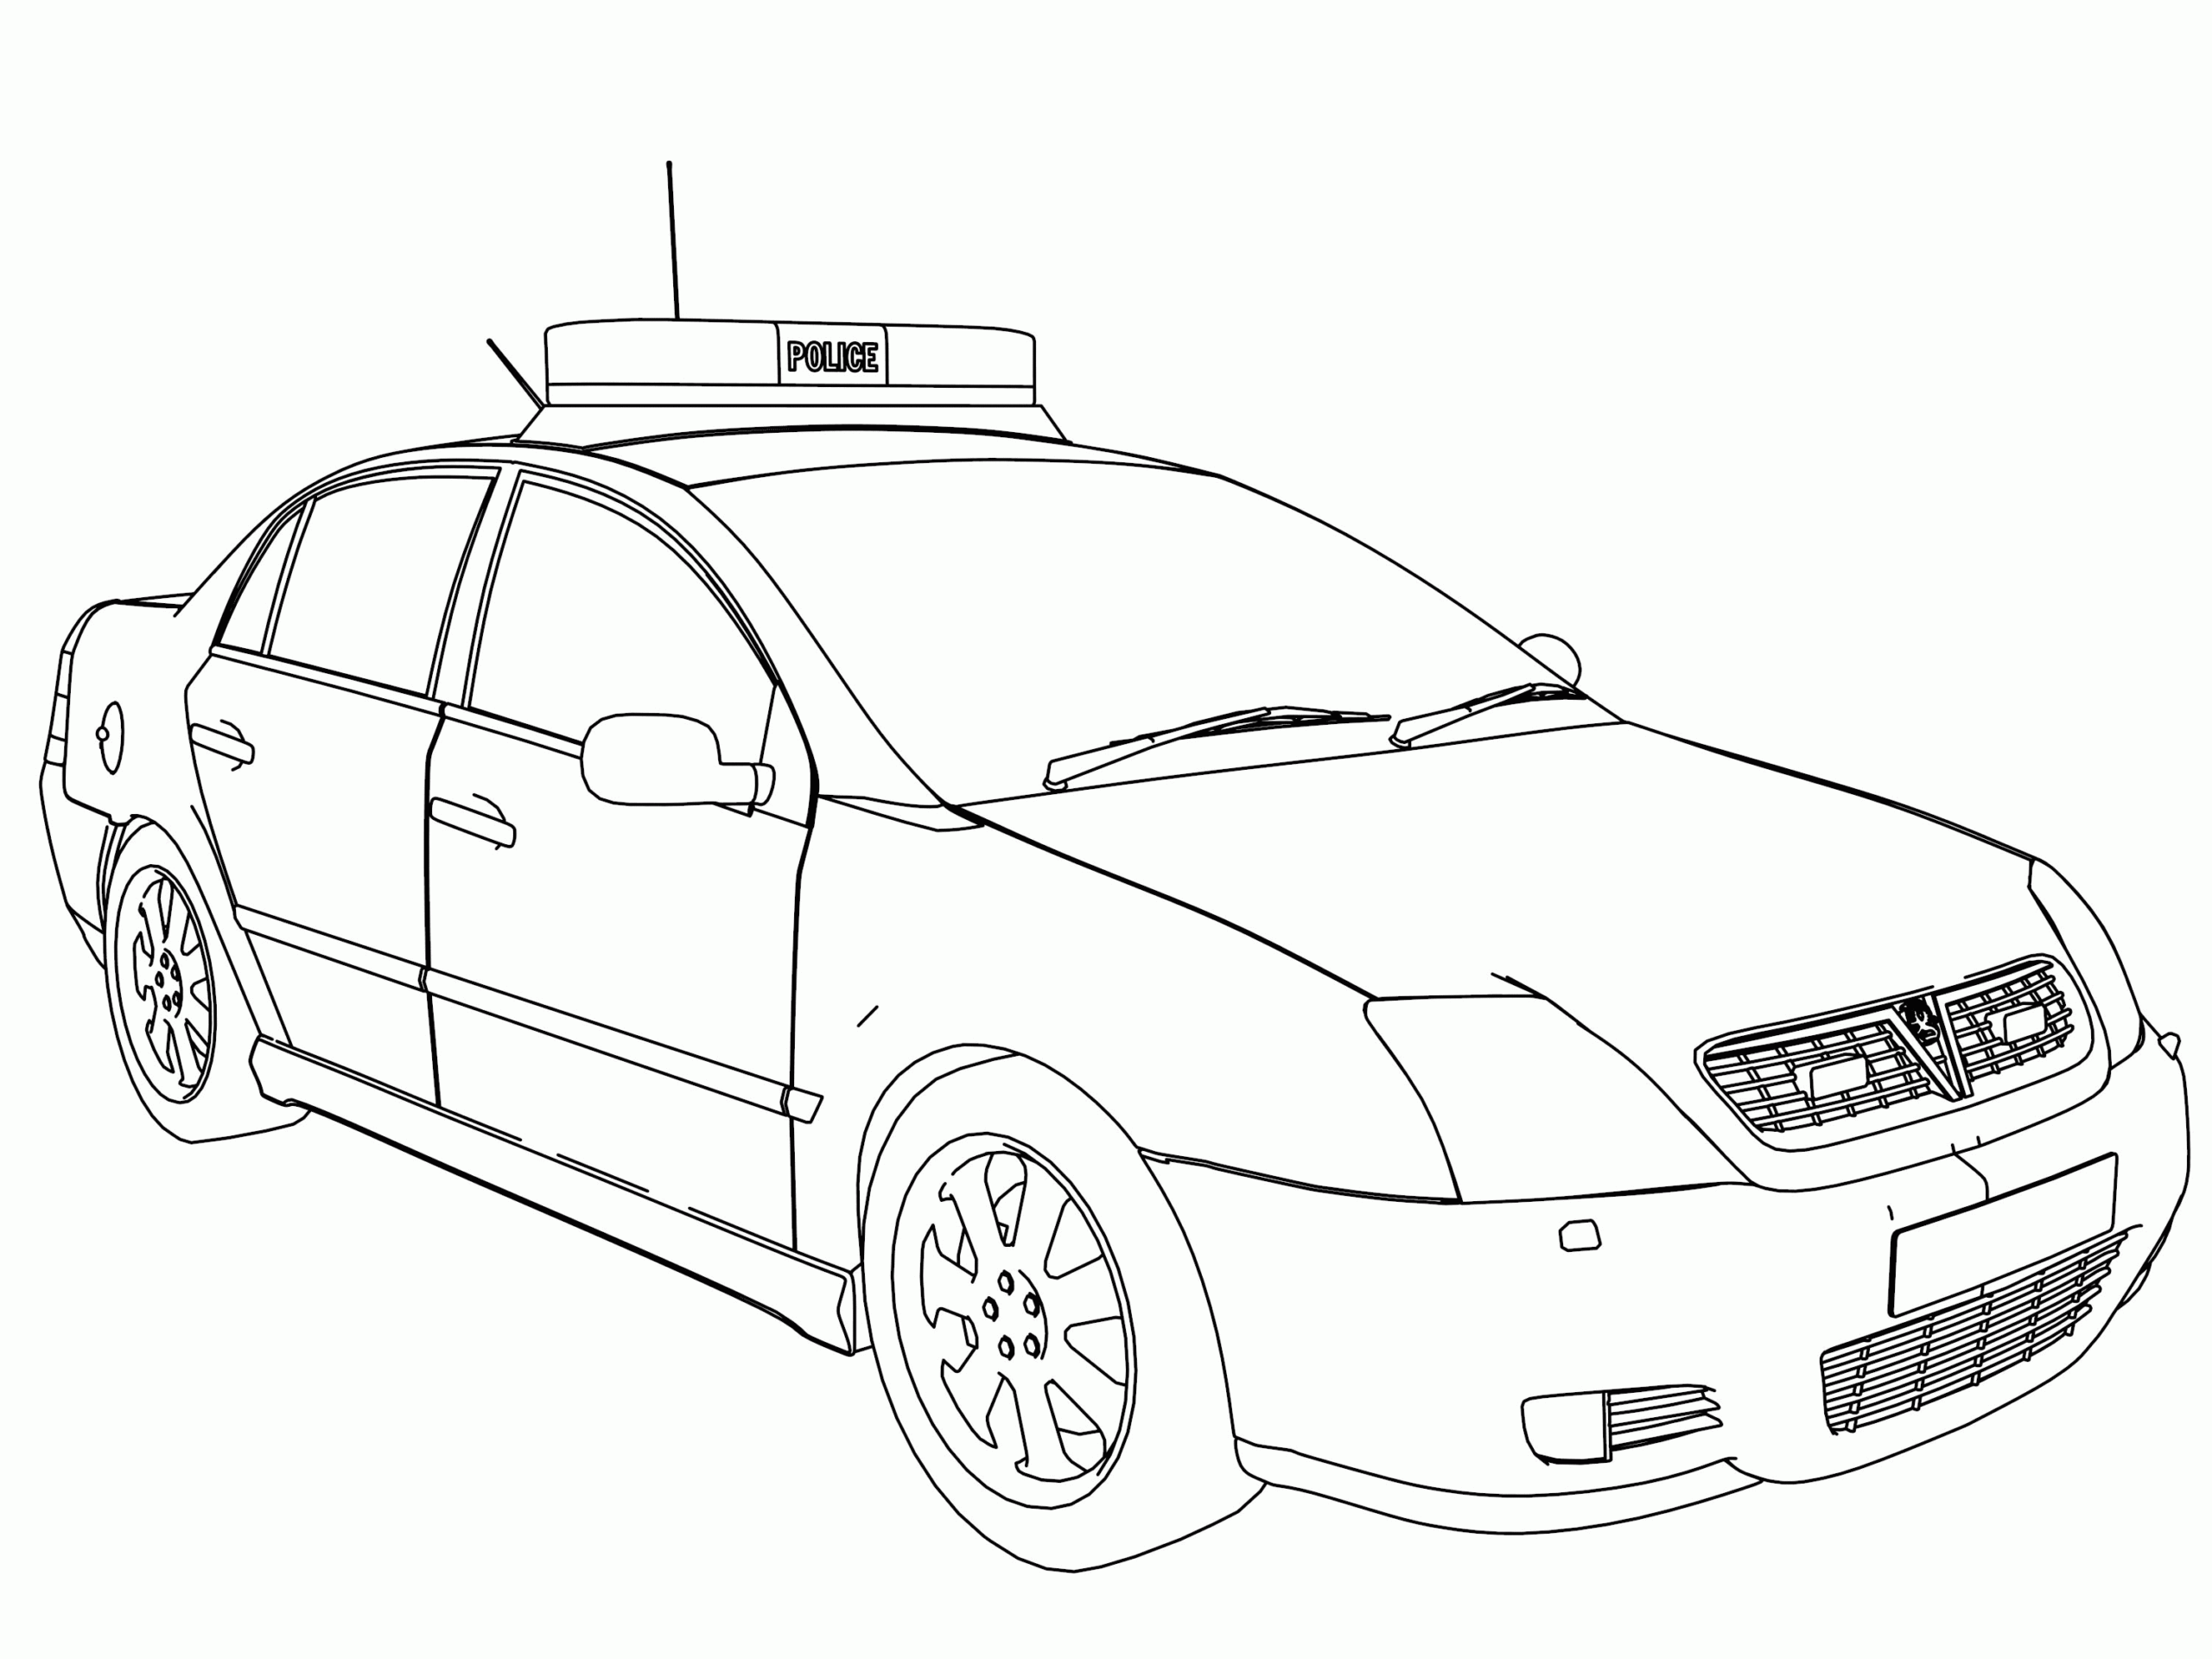 police car coloring pages pdf